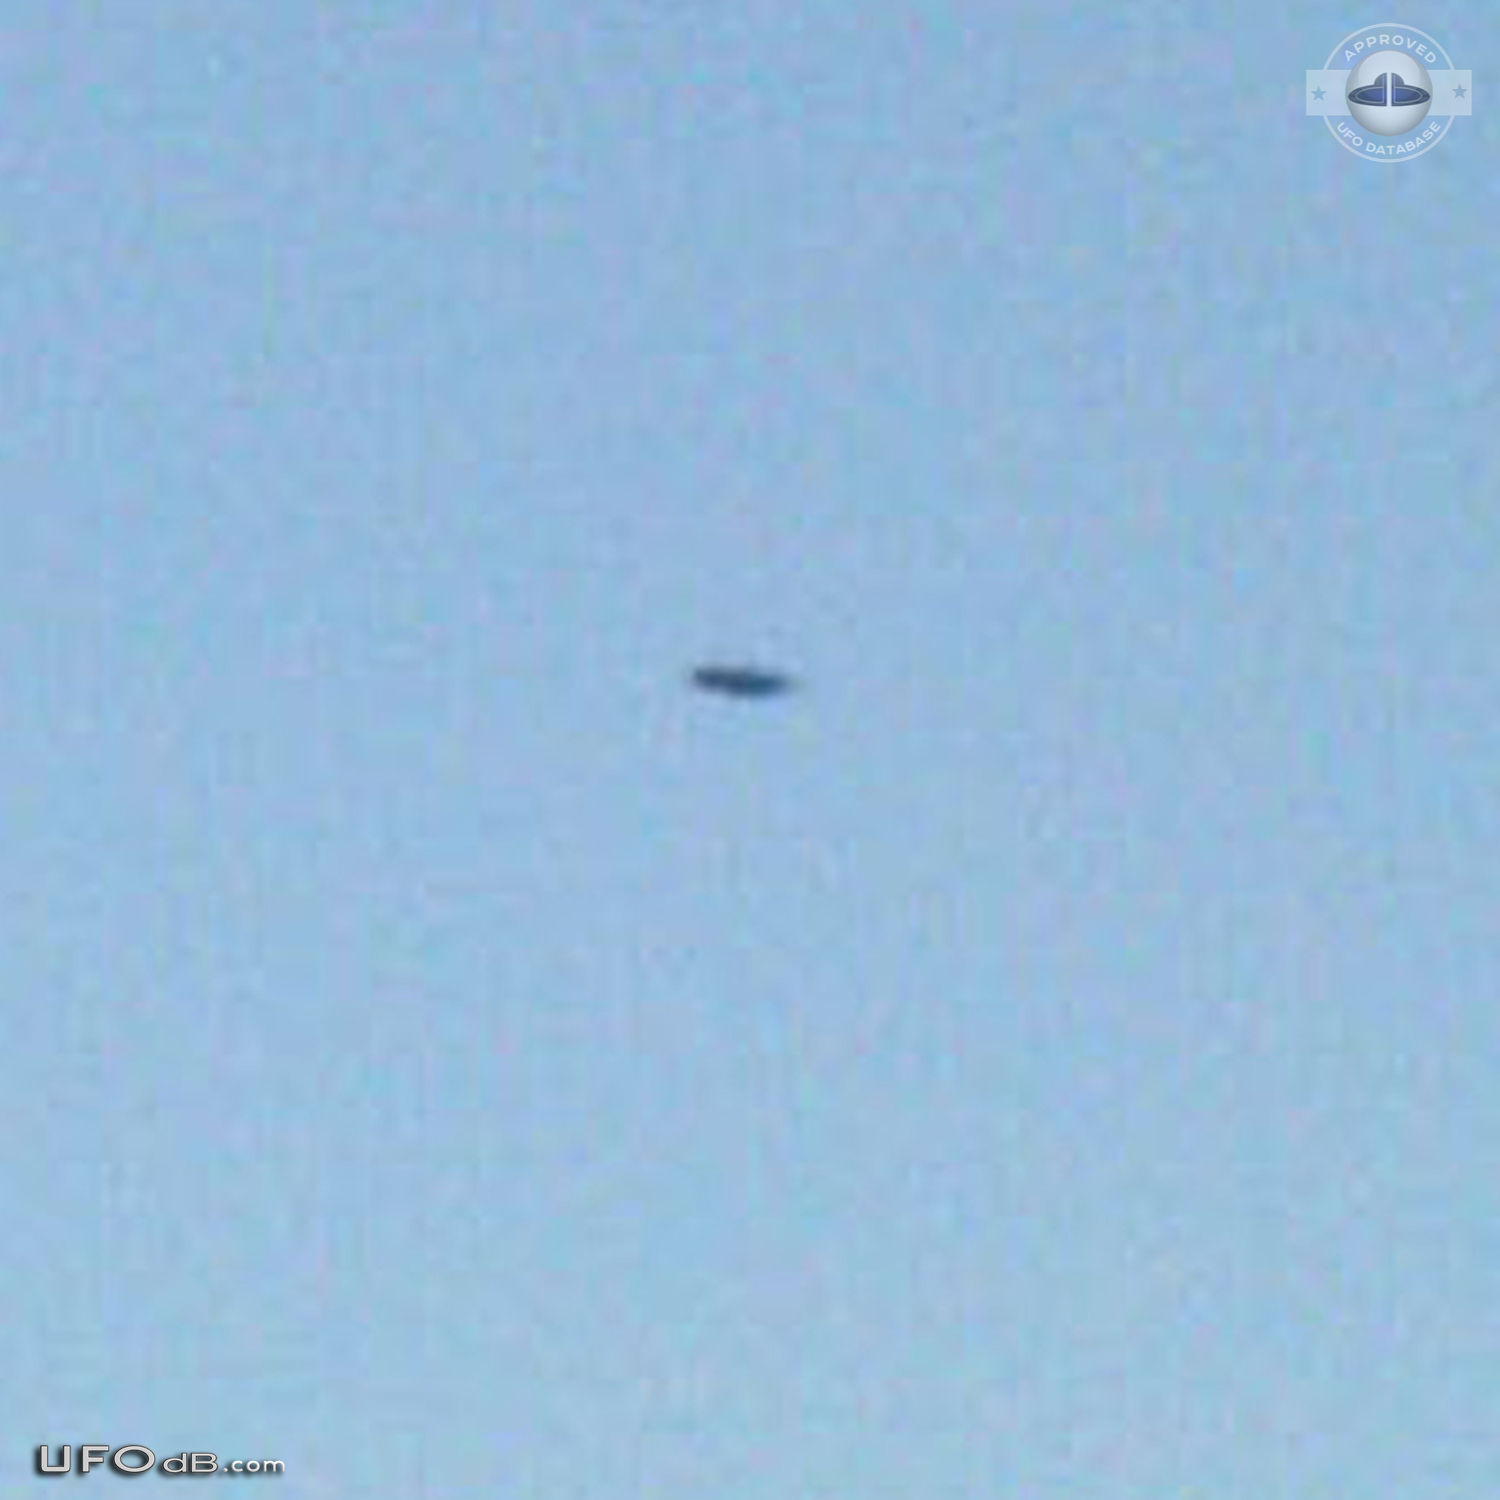 Silver saucer UFO caught on picture in Clarksville Tennessee USA 2012 UFO Picture #473-2